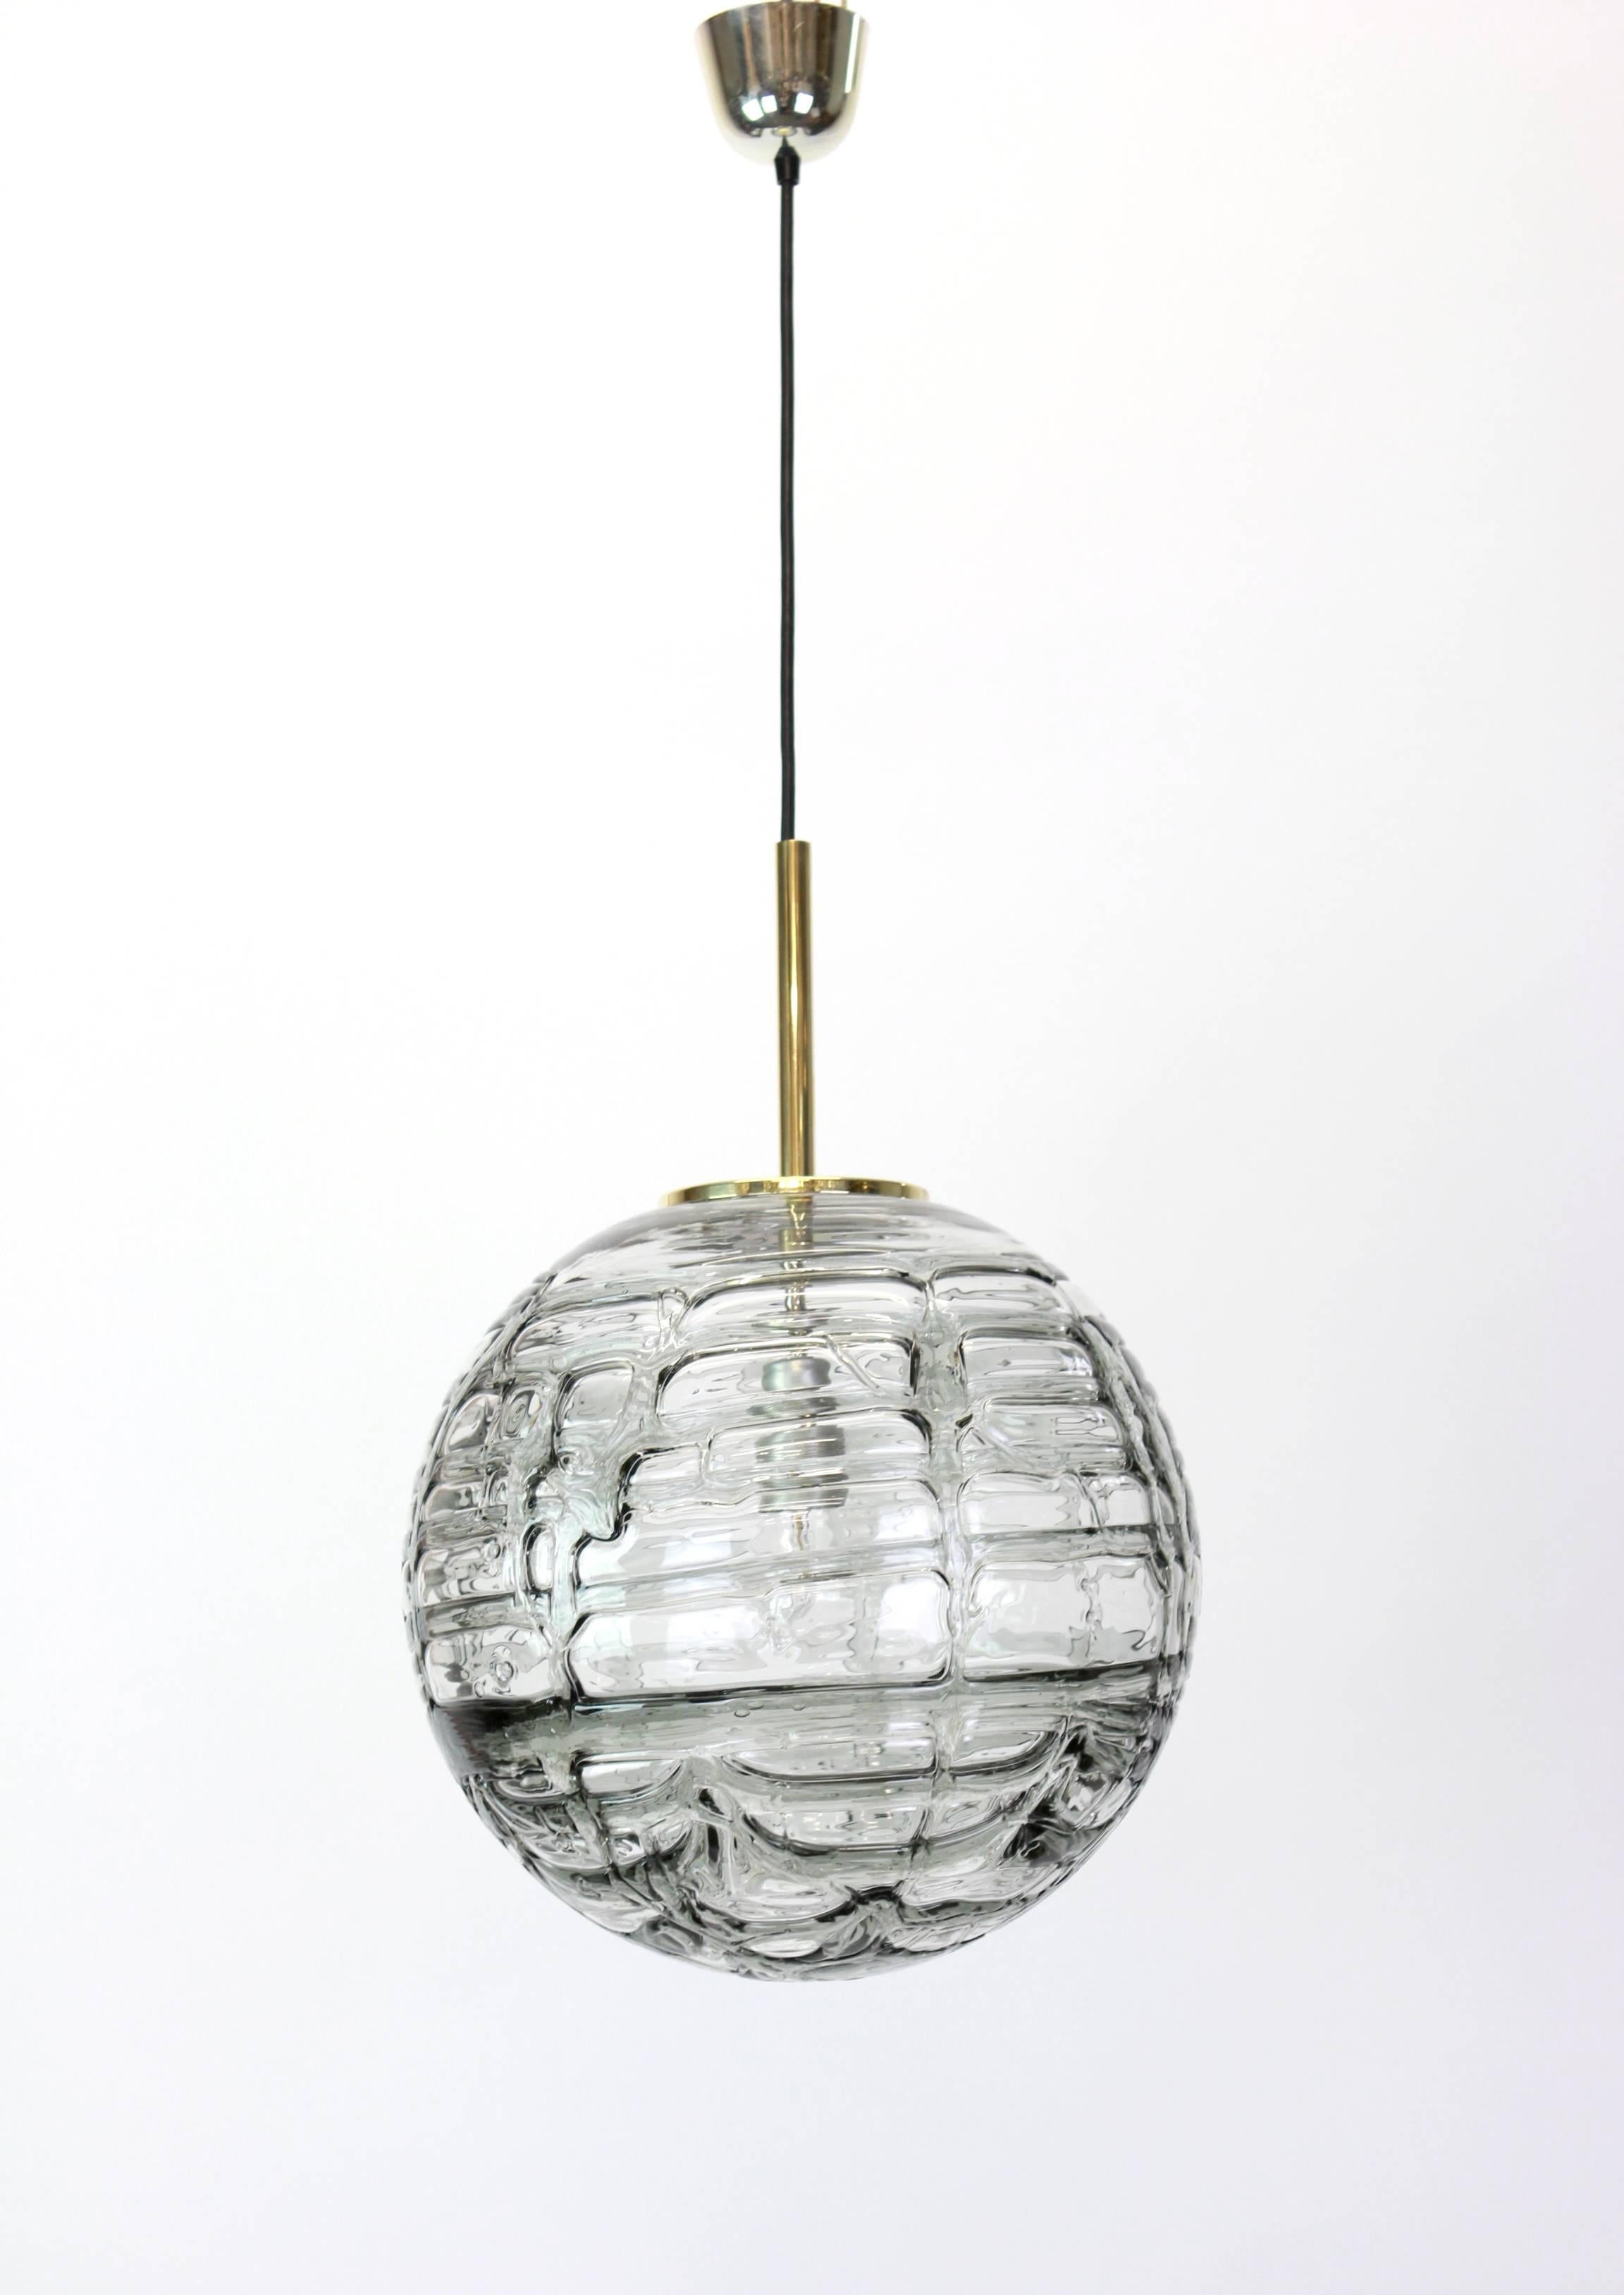 Doria ceiling light with large volcanic Murano glass ball.
High quality of materials - gives a wonderful light effect when it is on.

Sockets: One x E27 standard bulbs. Max 80 watt and function on voltage from 110 till 240 volts. (for USA - UK –